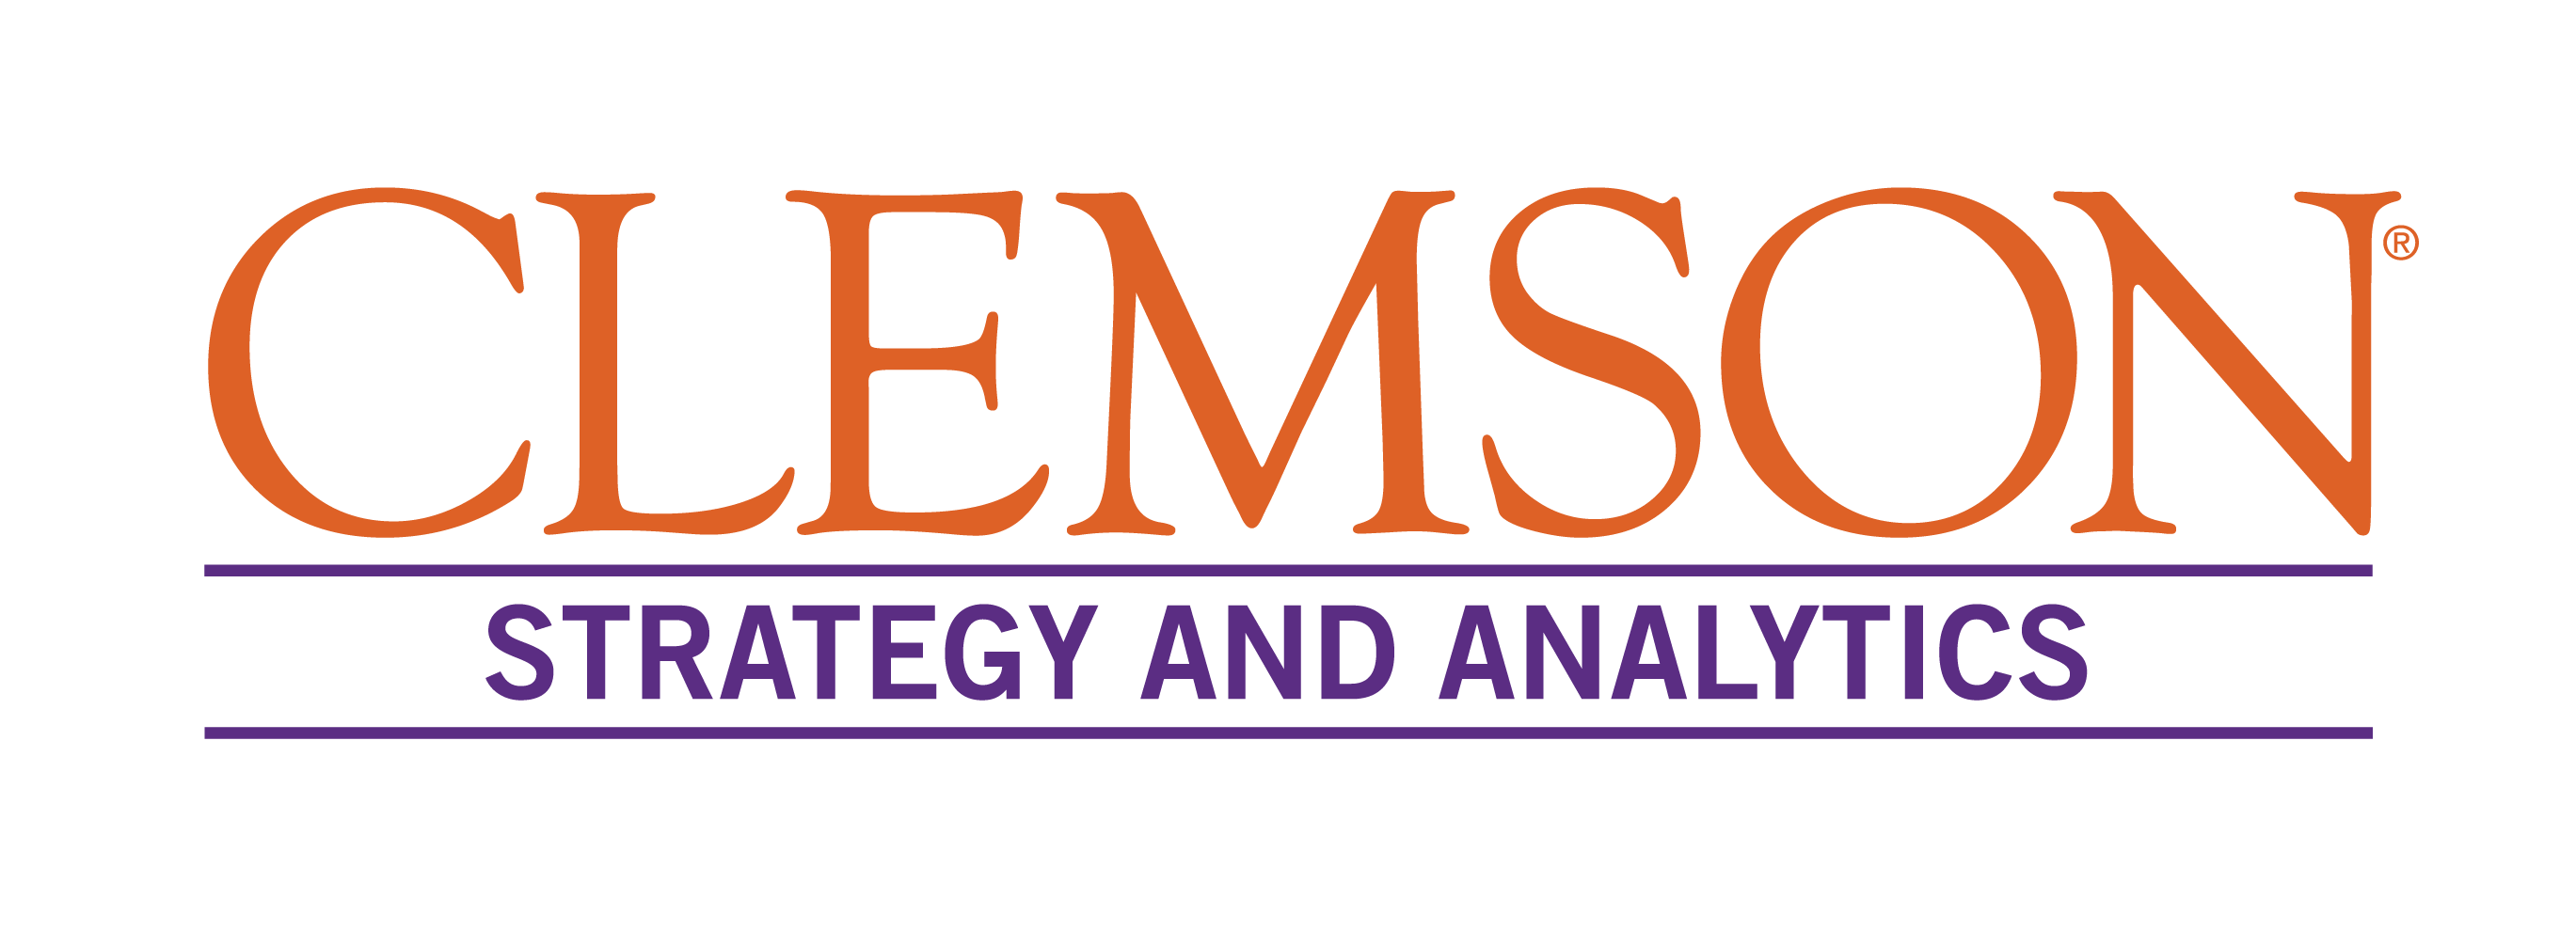 Strategy and Analytics at Clemson University